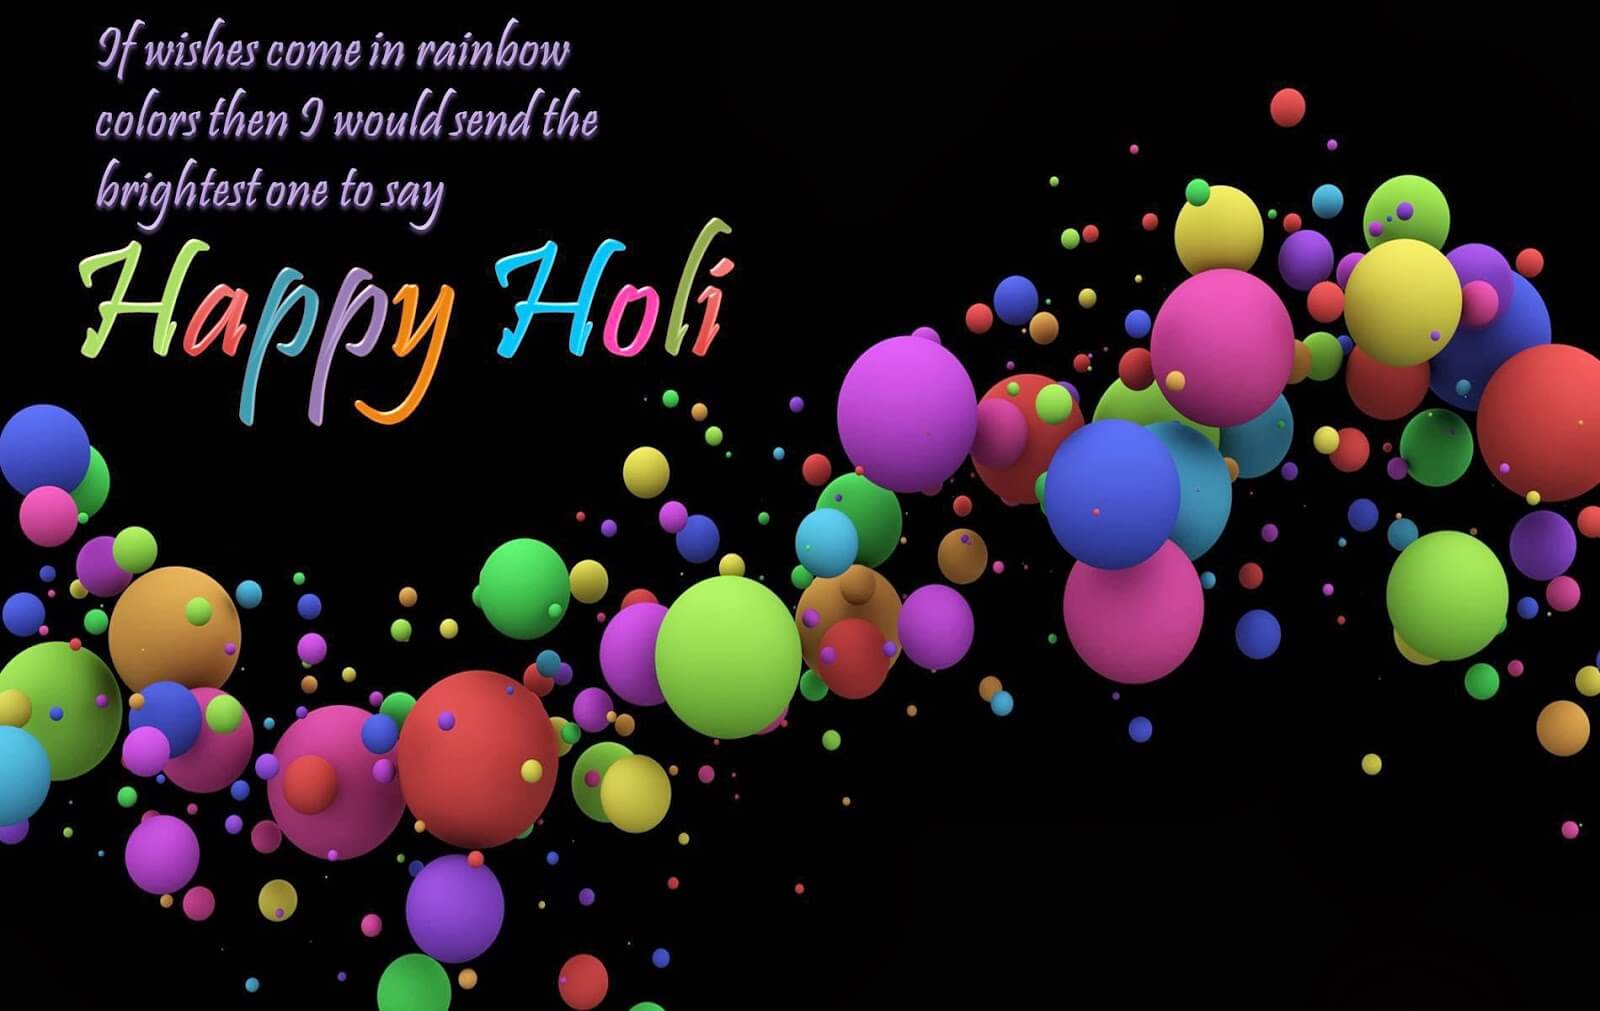 happy holi 2019 poetry in english